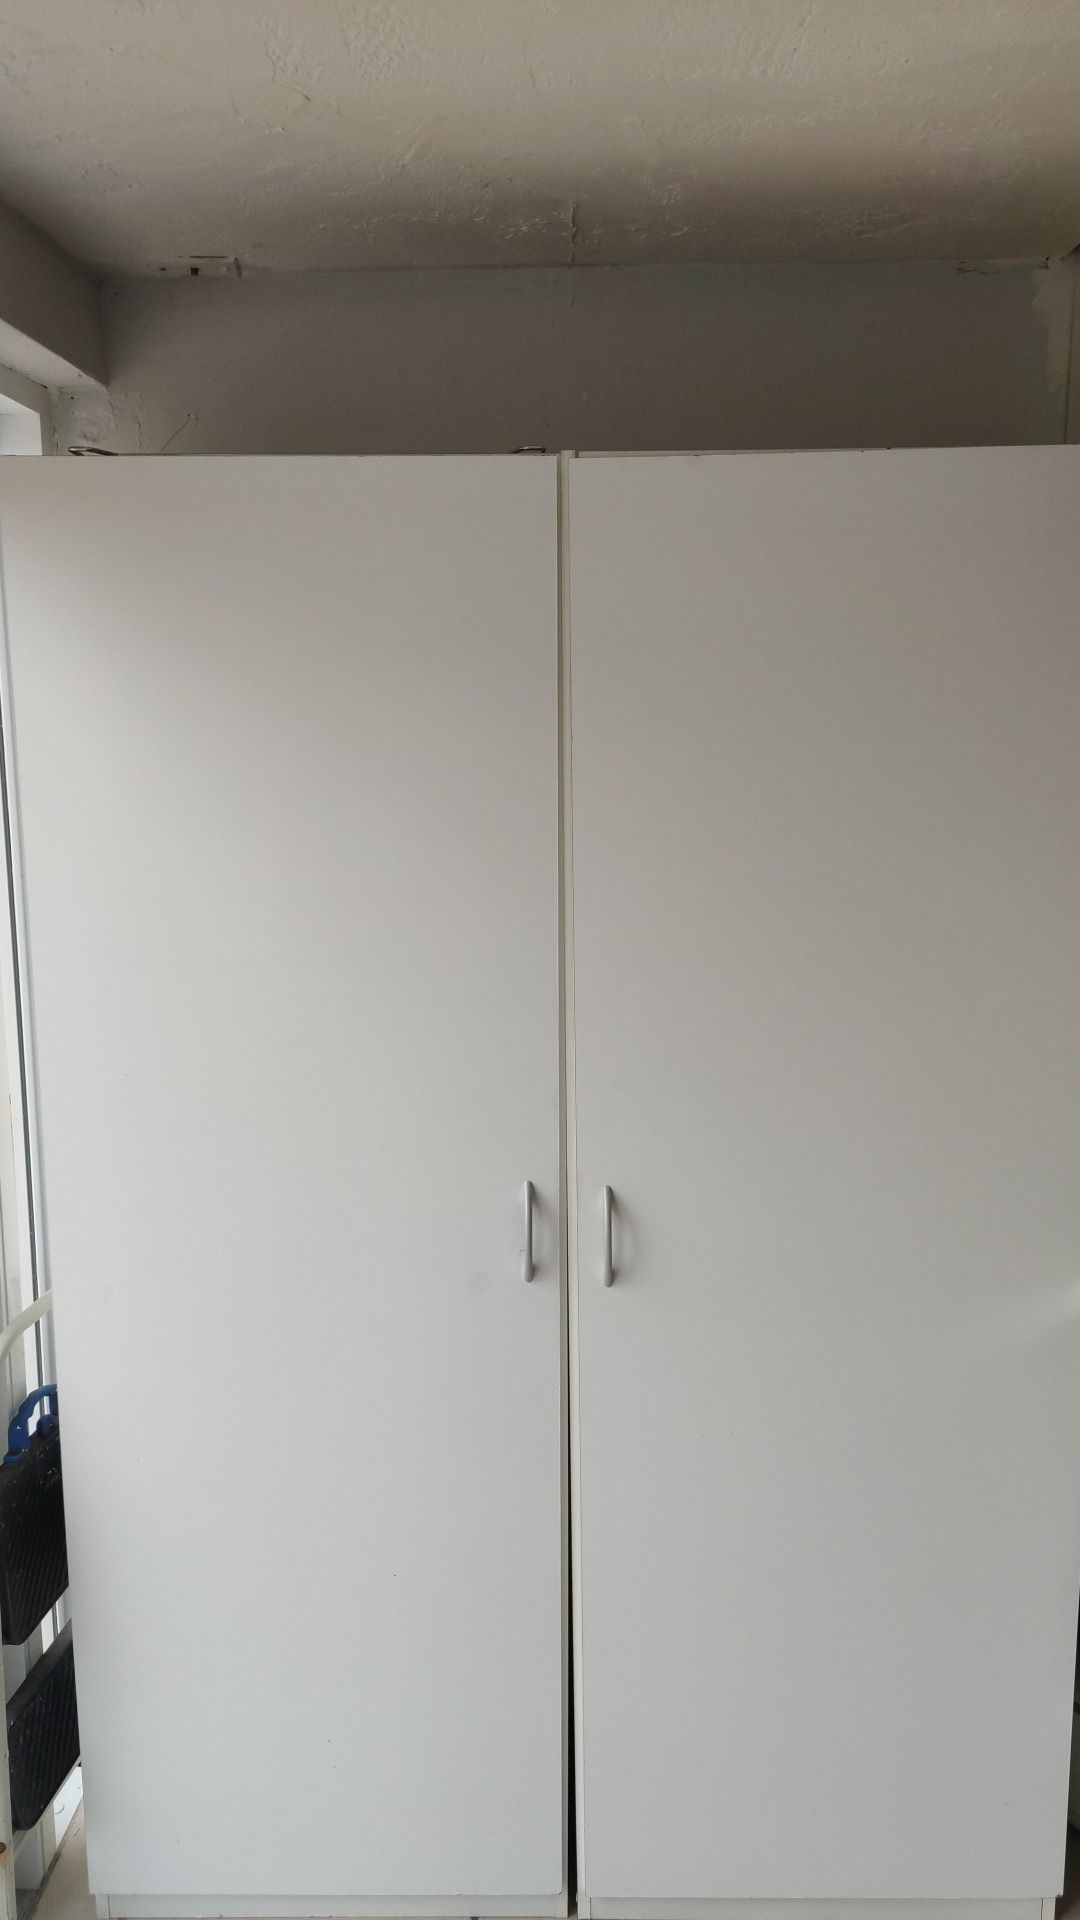 Cabinet closet kitchen garage- Price is for 2 units. Shelf can be adjusted as desire. Home depot retail price 90 each